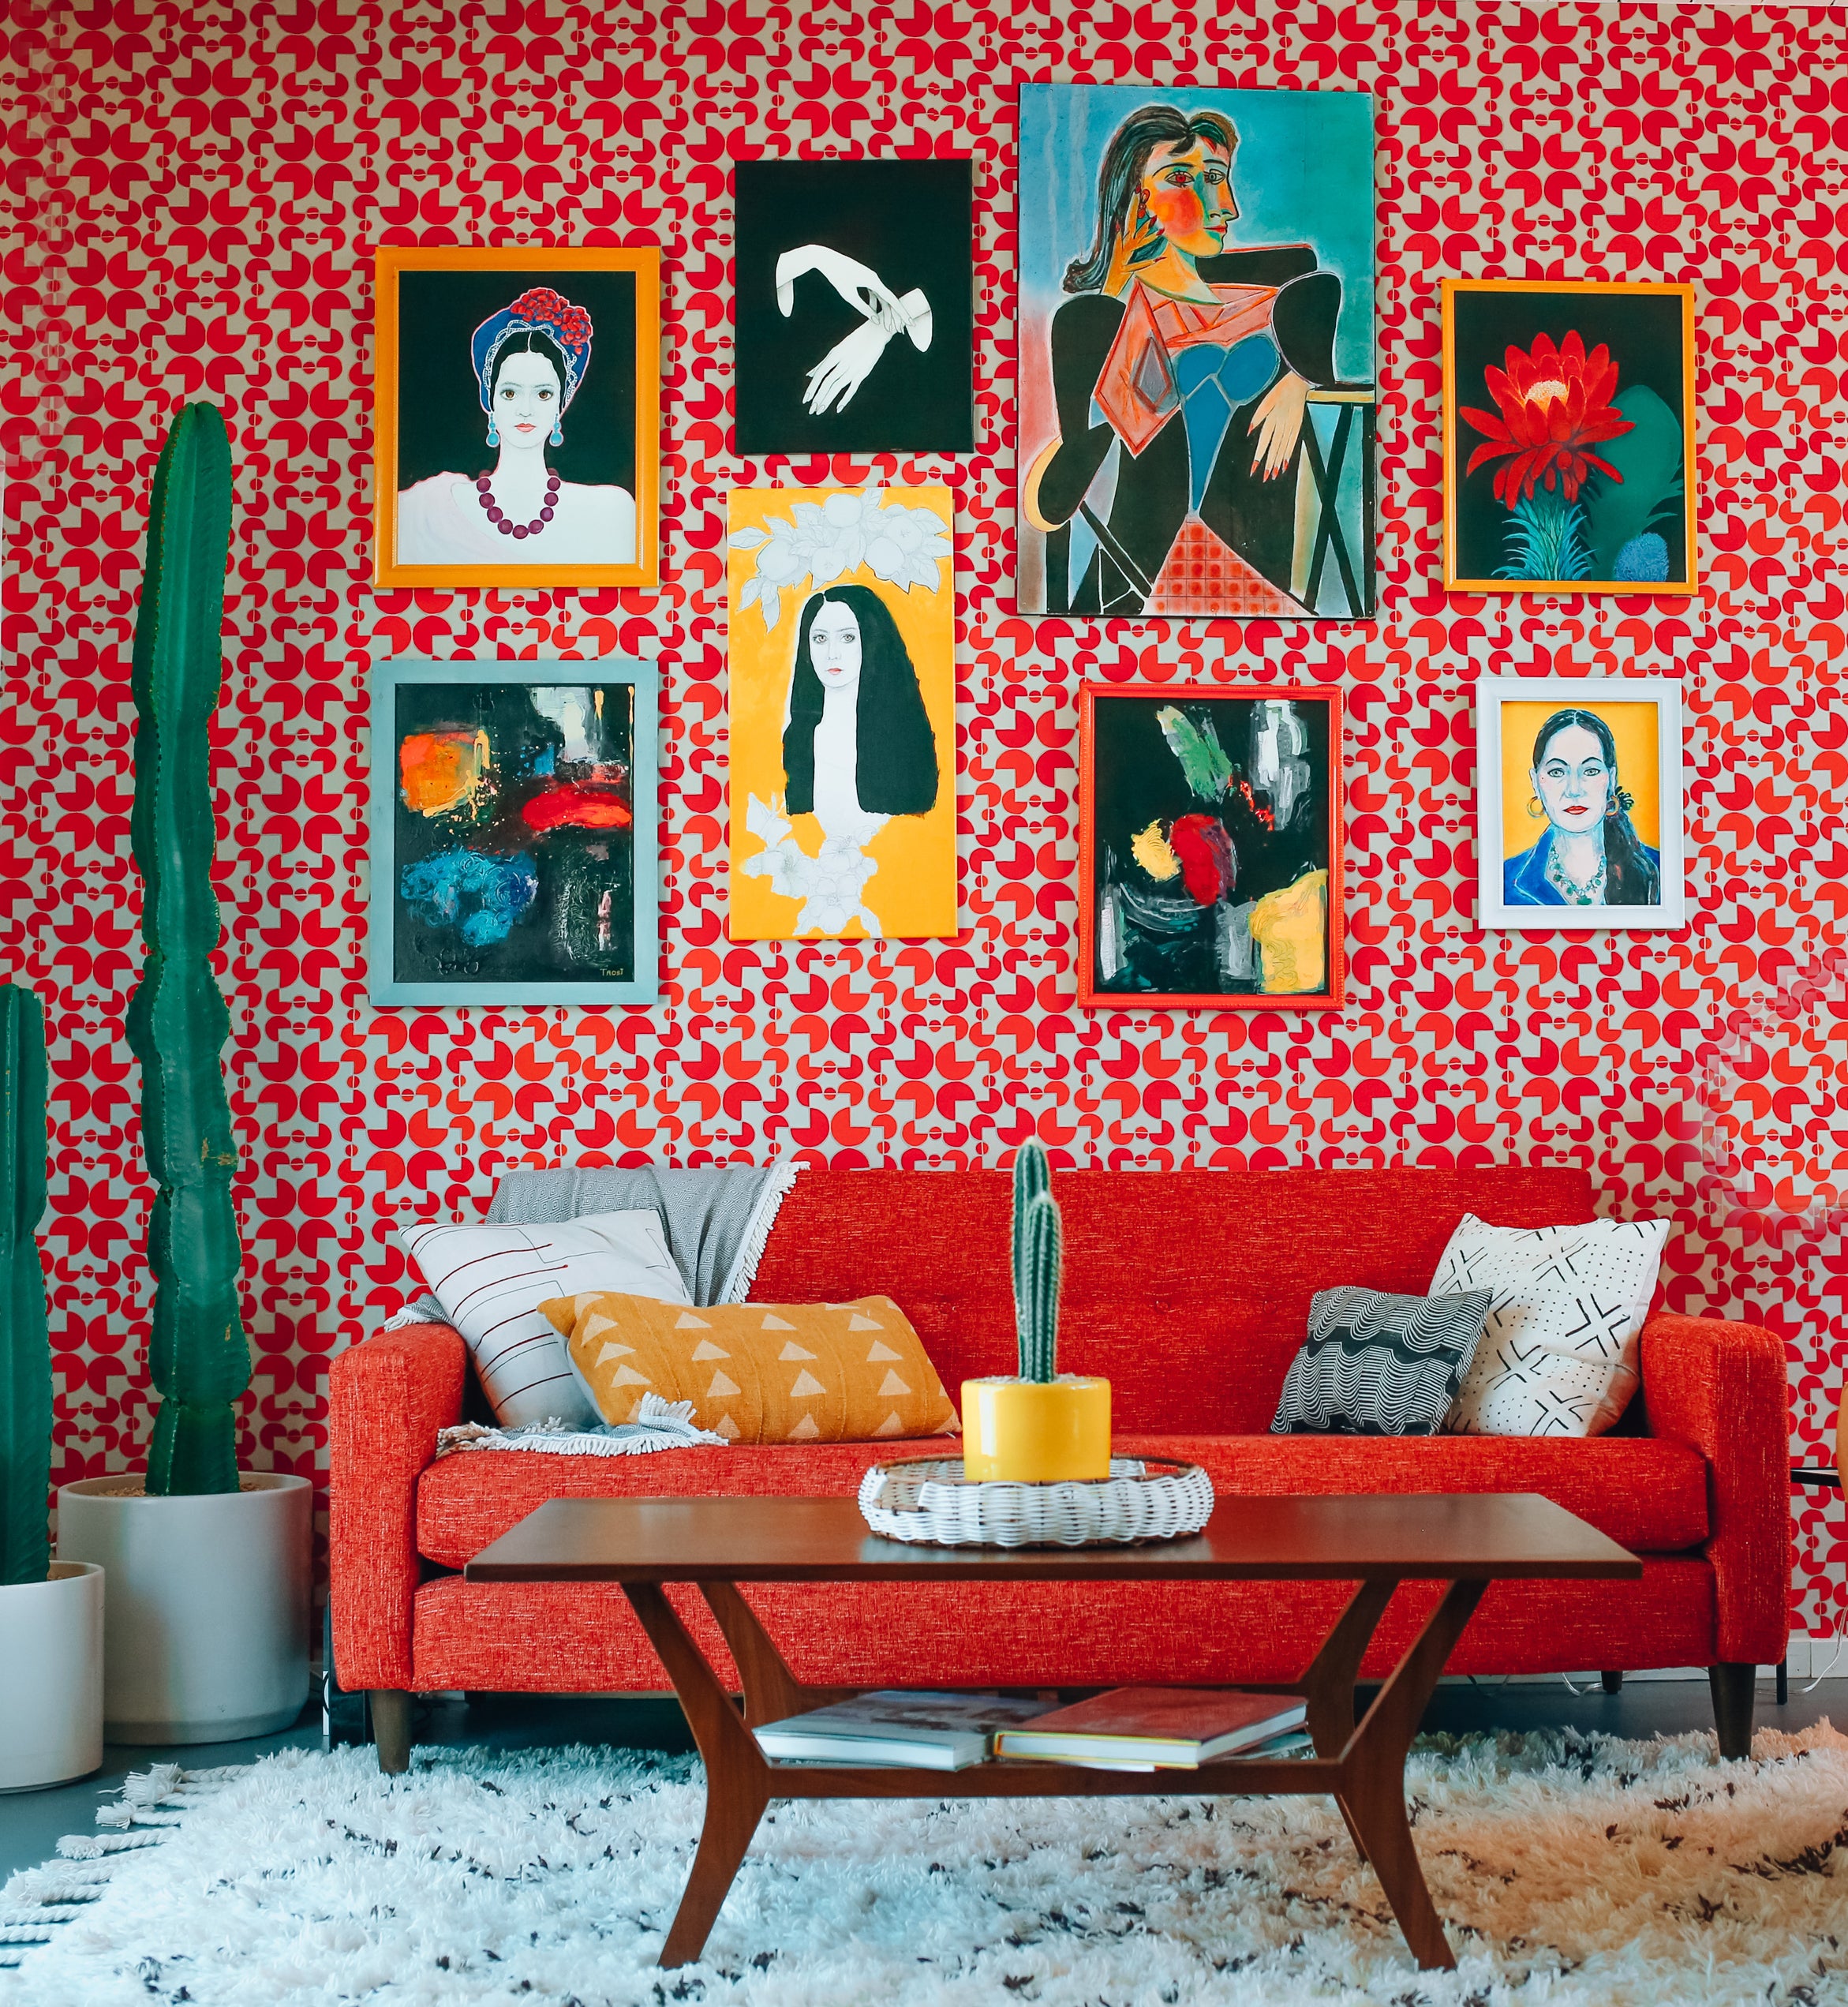 Gallery wall on wall with red wallpaper